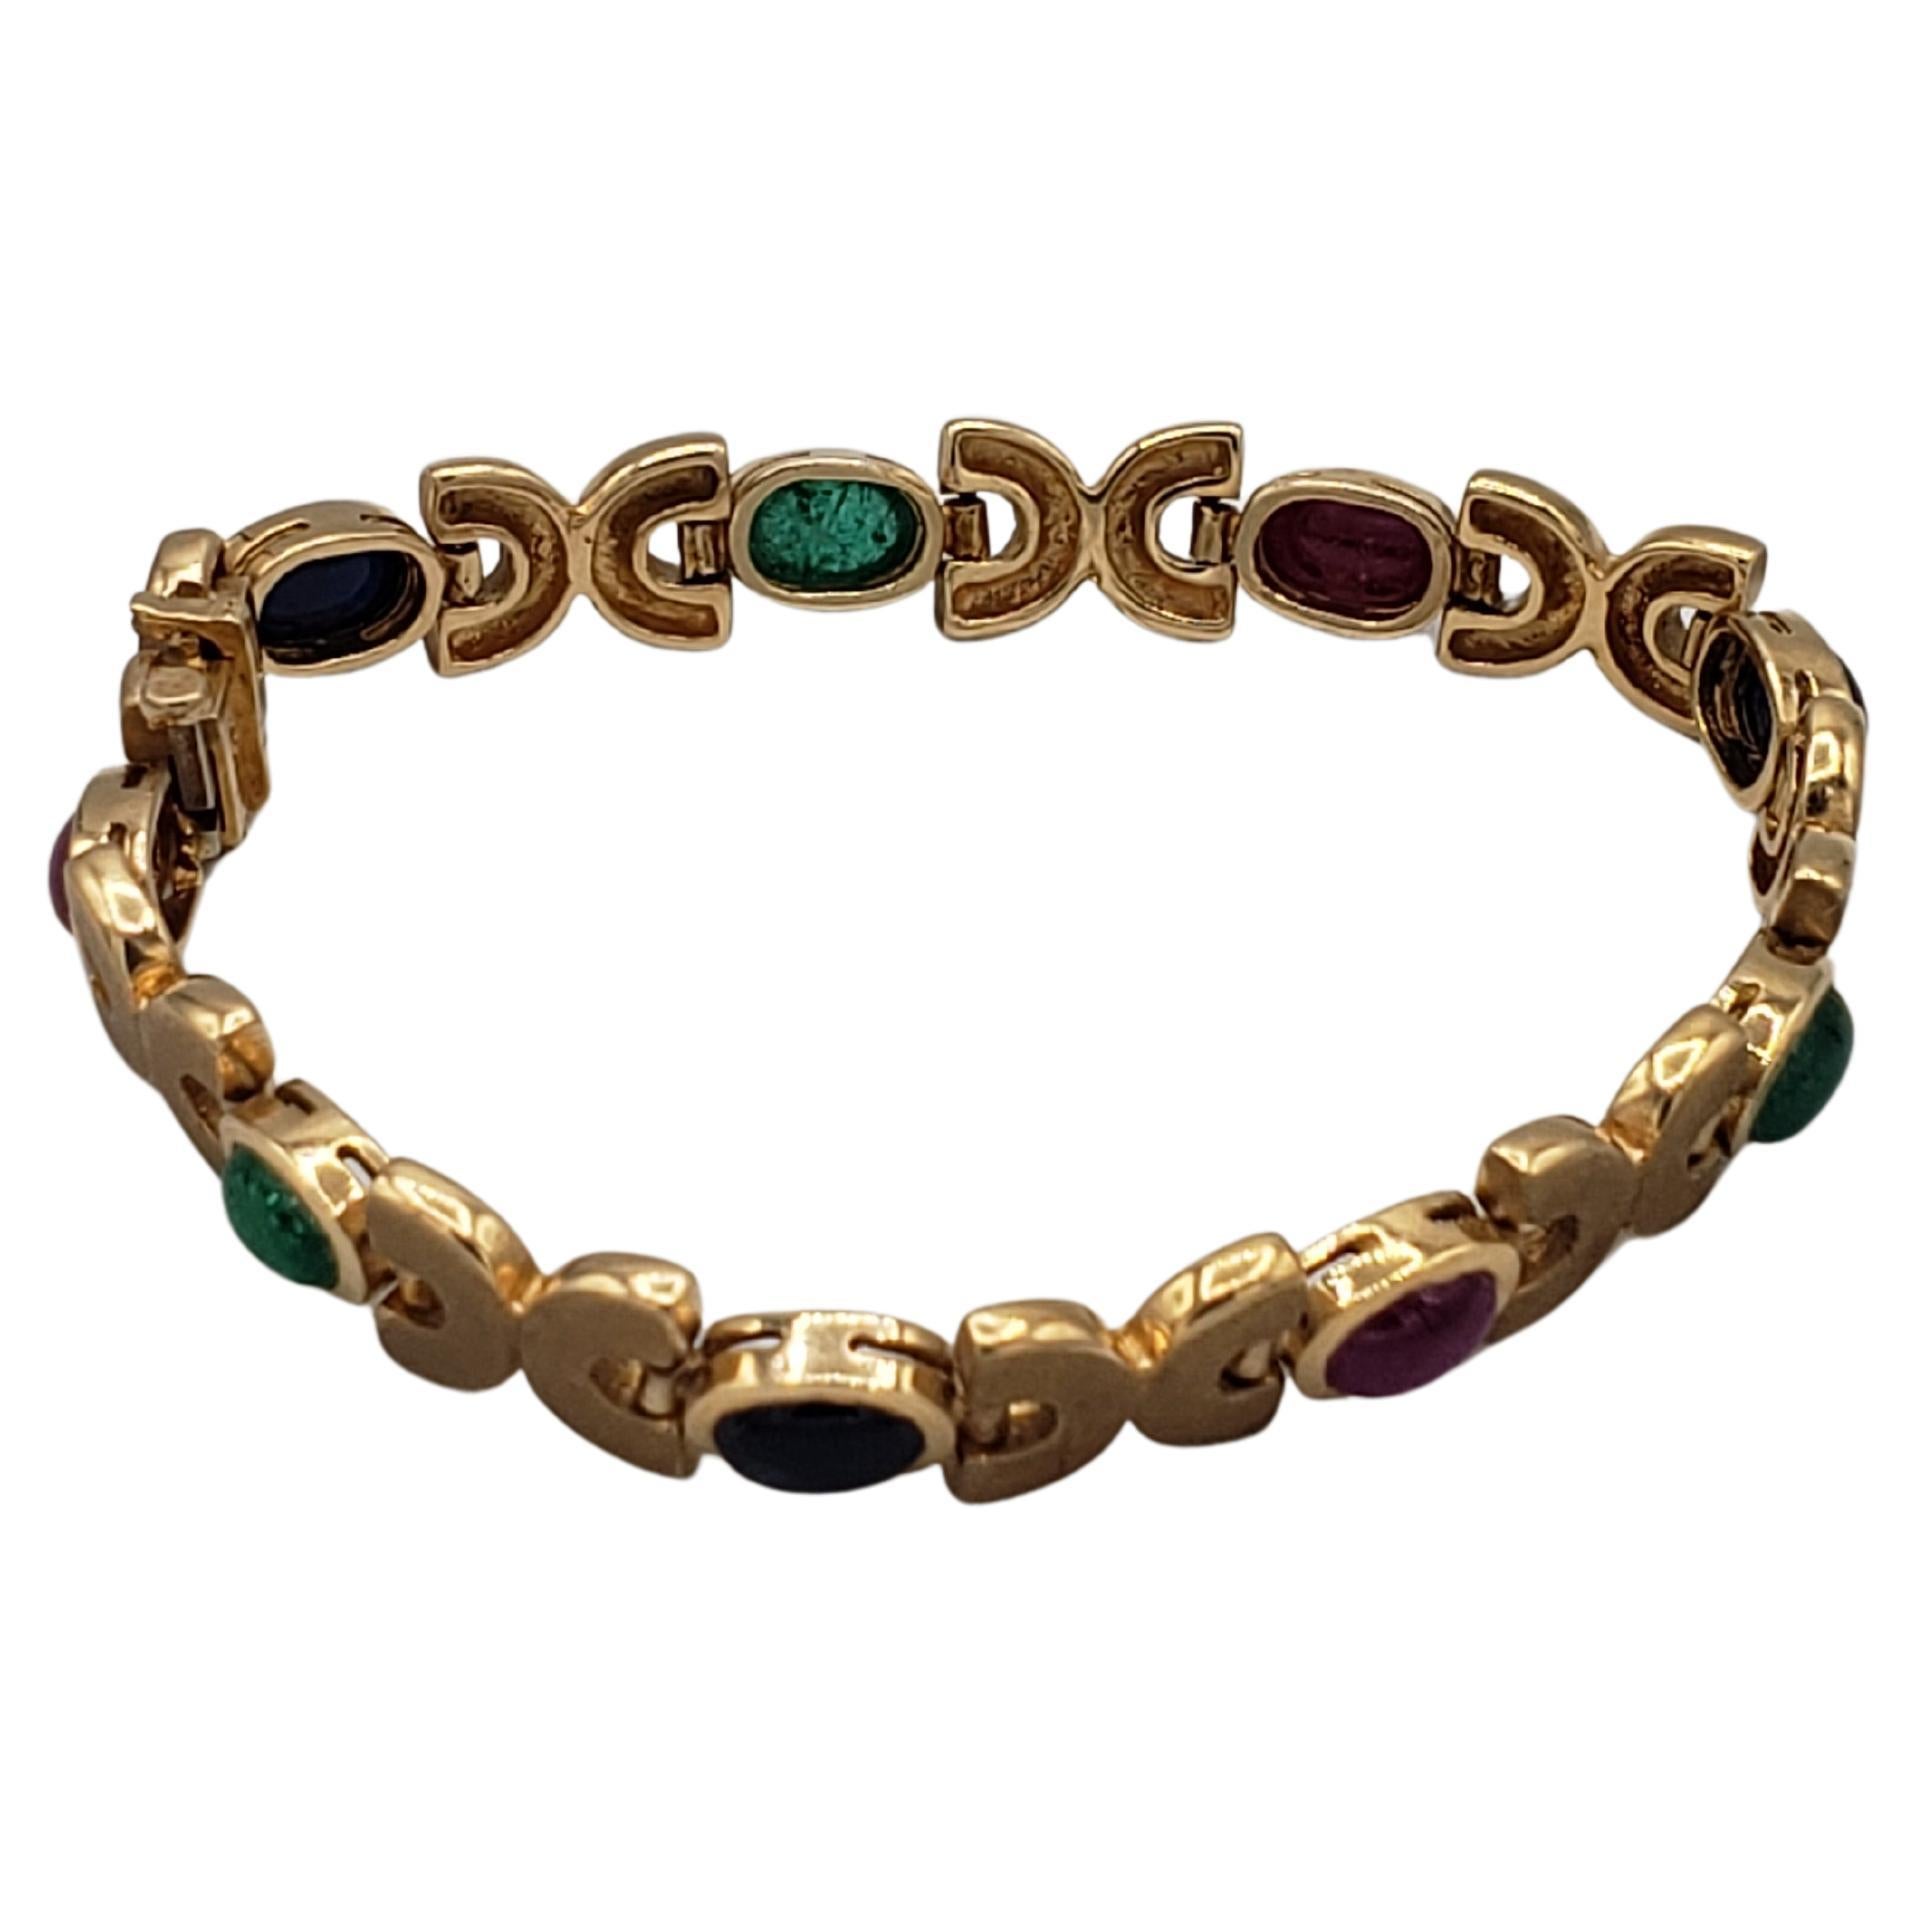 This gorgeous bracelet is a stunning example of beauty captured in precious gemstones. Crafted in 14k solid yellow gold, this piece features natural ruby, sapphire, and emerald stones in oval shapes. The tennis-style bracelet measures 7 inches in